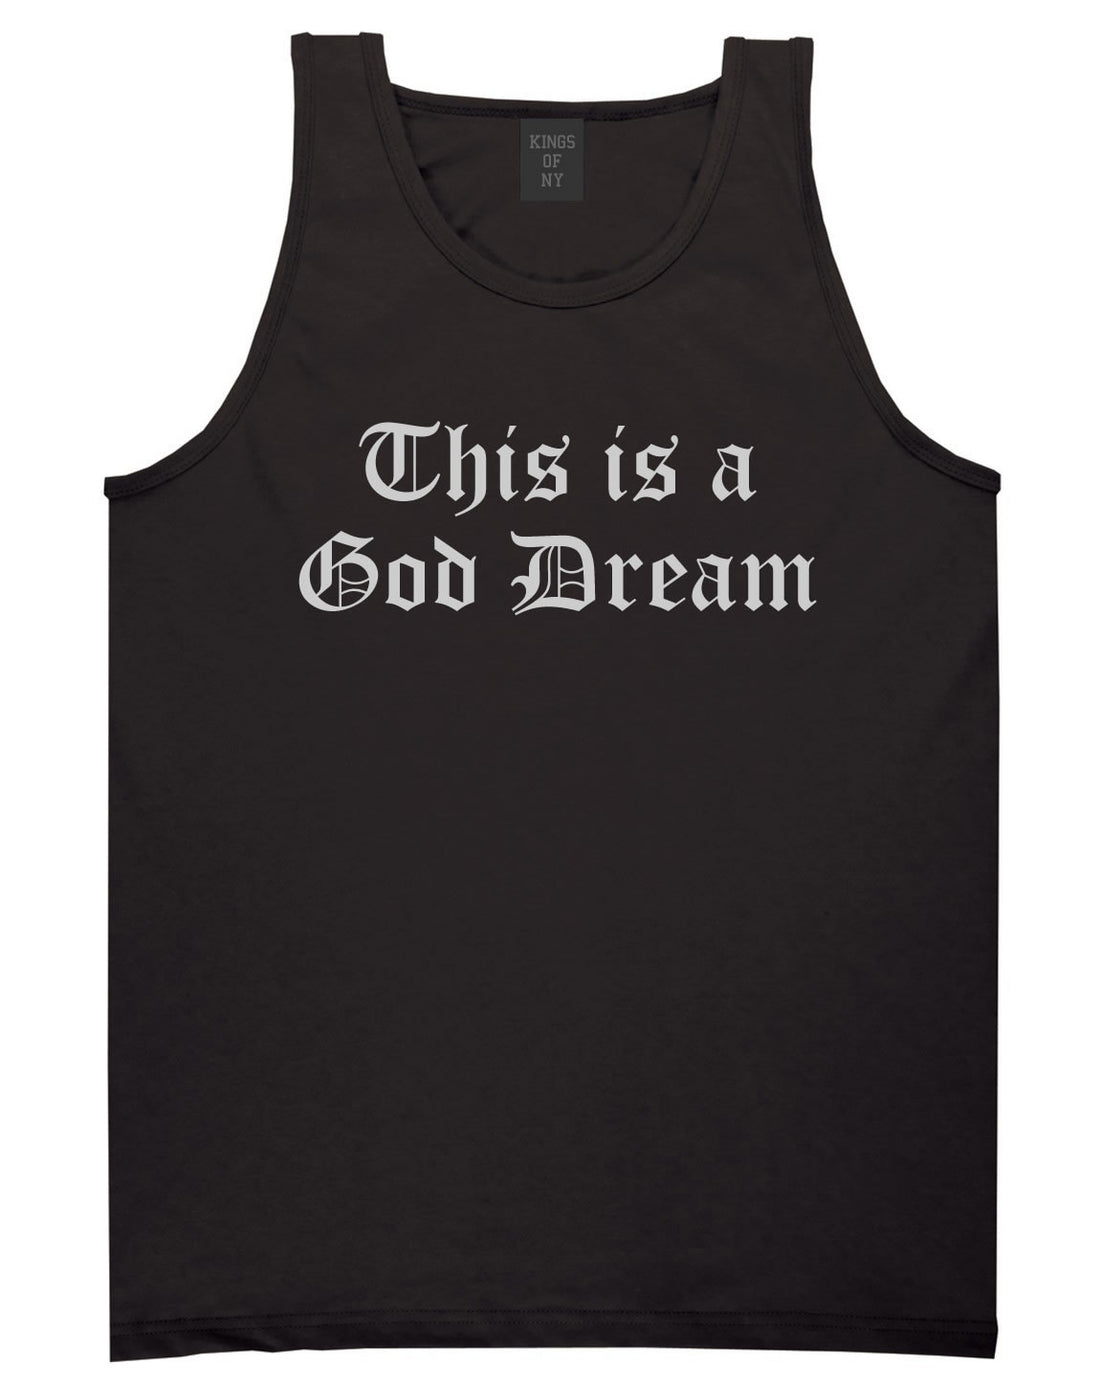 This Is A God Dream Gothic Old English Tank Top in Black By Kings Of NY